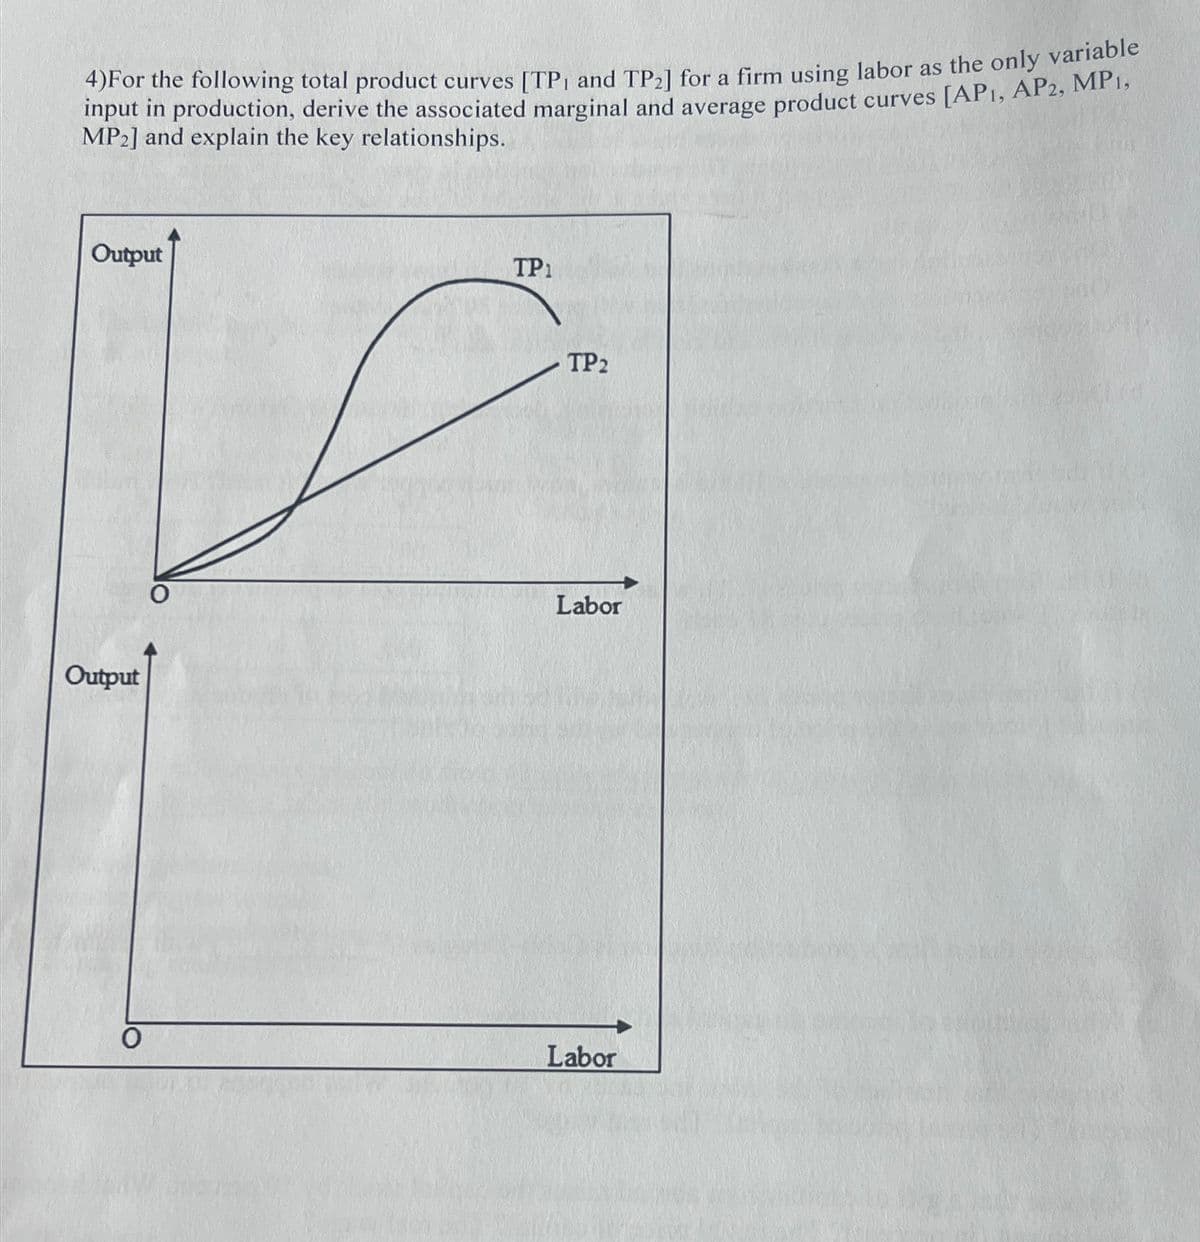 4)For the following total product curves [TP, and TP2] for a firm using labor as the only variable
input in production, derive the associated marginal and average product curves [AP1, AP2, MP1,
MP2] and explain the key relationships.
Output
Output
TP1
TP2
Labor
Labor